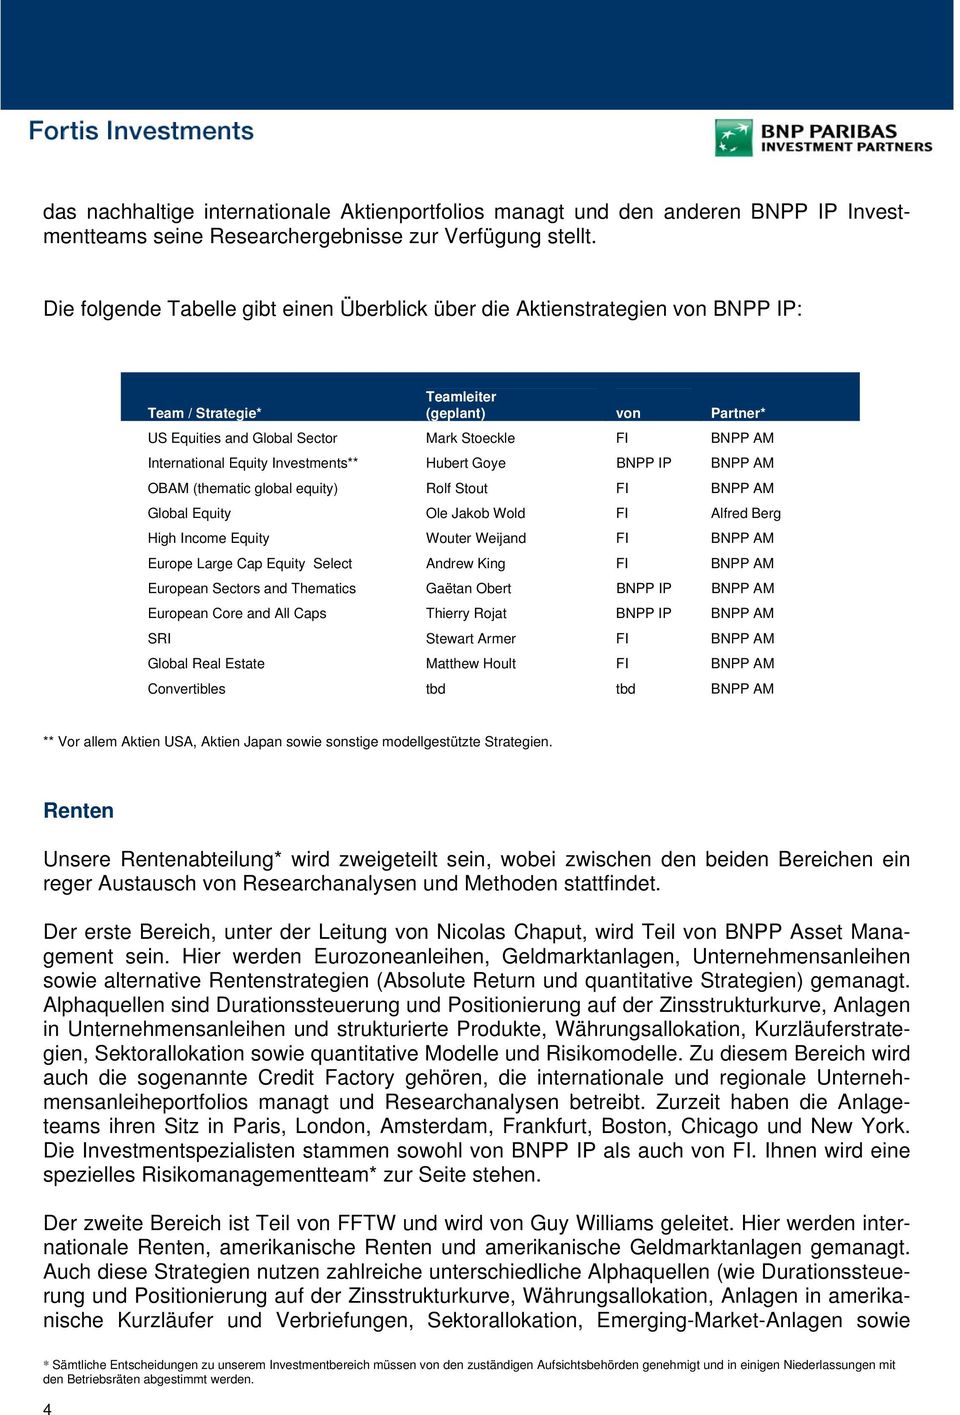 Goye BNPP IP BNPP AM OBAM (thematic global equity) Rolf Stout FI BNPP AM Global Equity Ole Jakob Wold FI Alfred Berg High Income Equity Wouter Weijand FI BNPP AM Europe Large Cap Equity Select Andrew